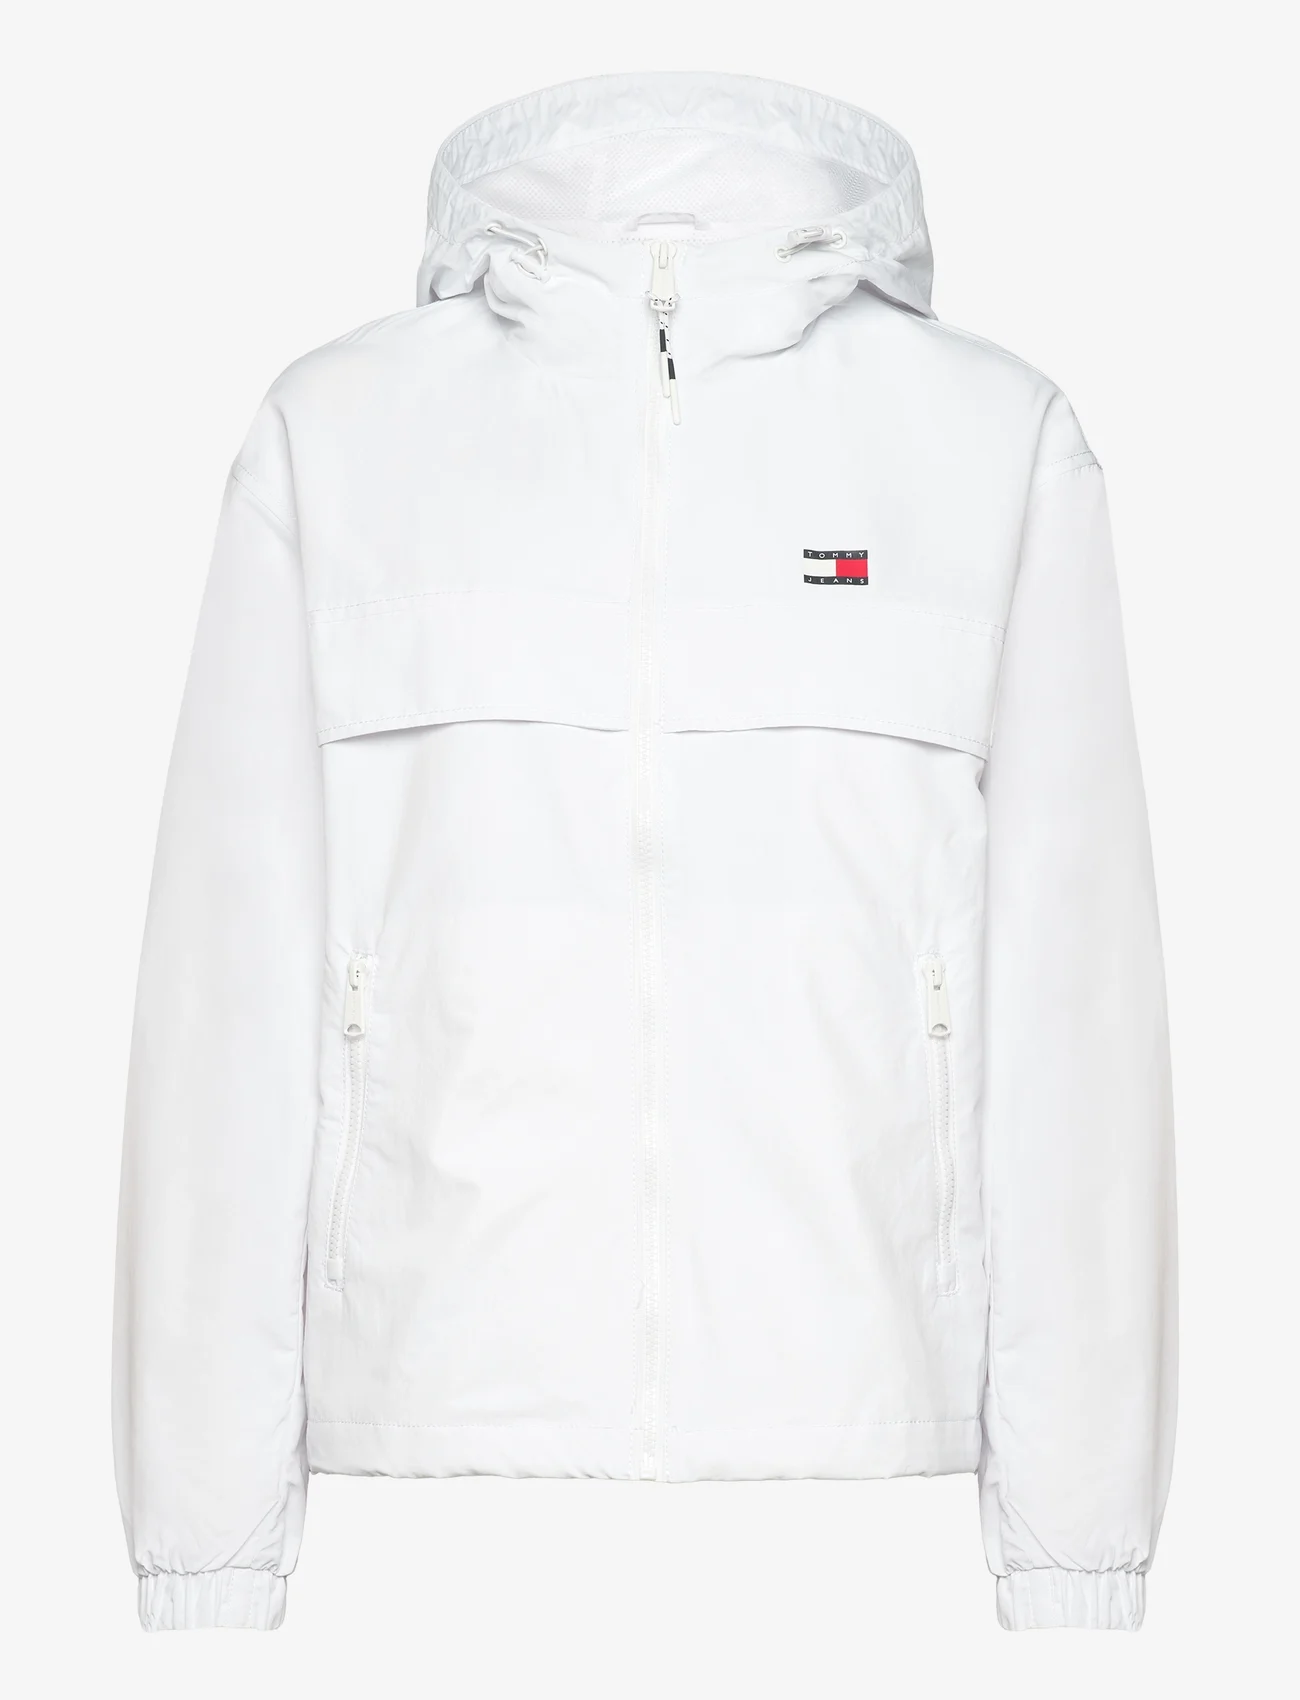 Tommy Jeans - TJW CHICAGO WINDBREAKER EXT - spring jackets - white - 0